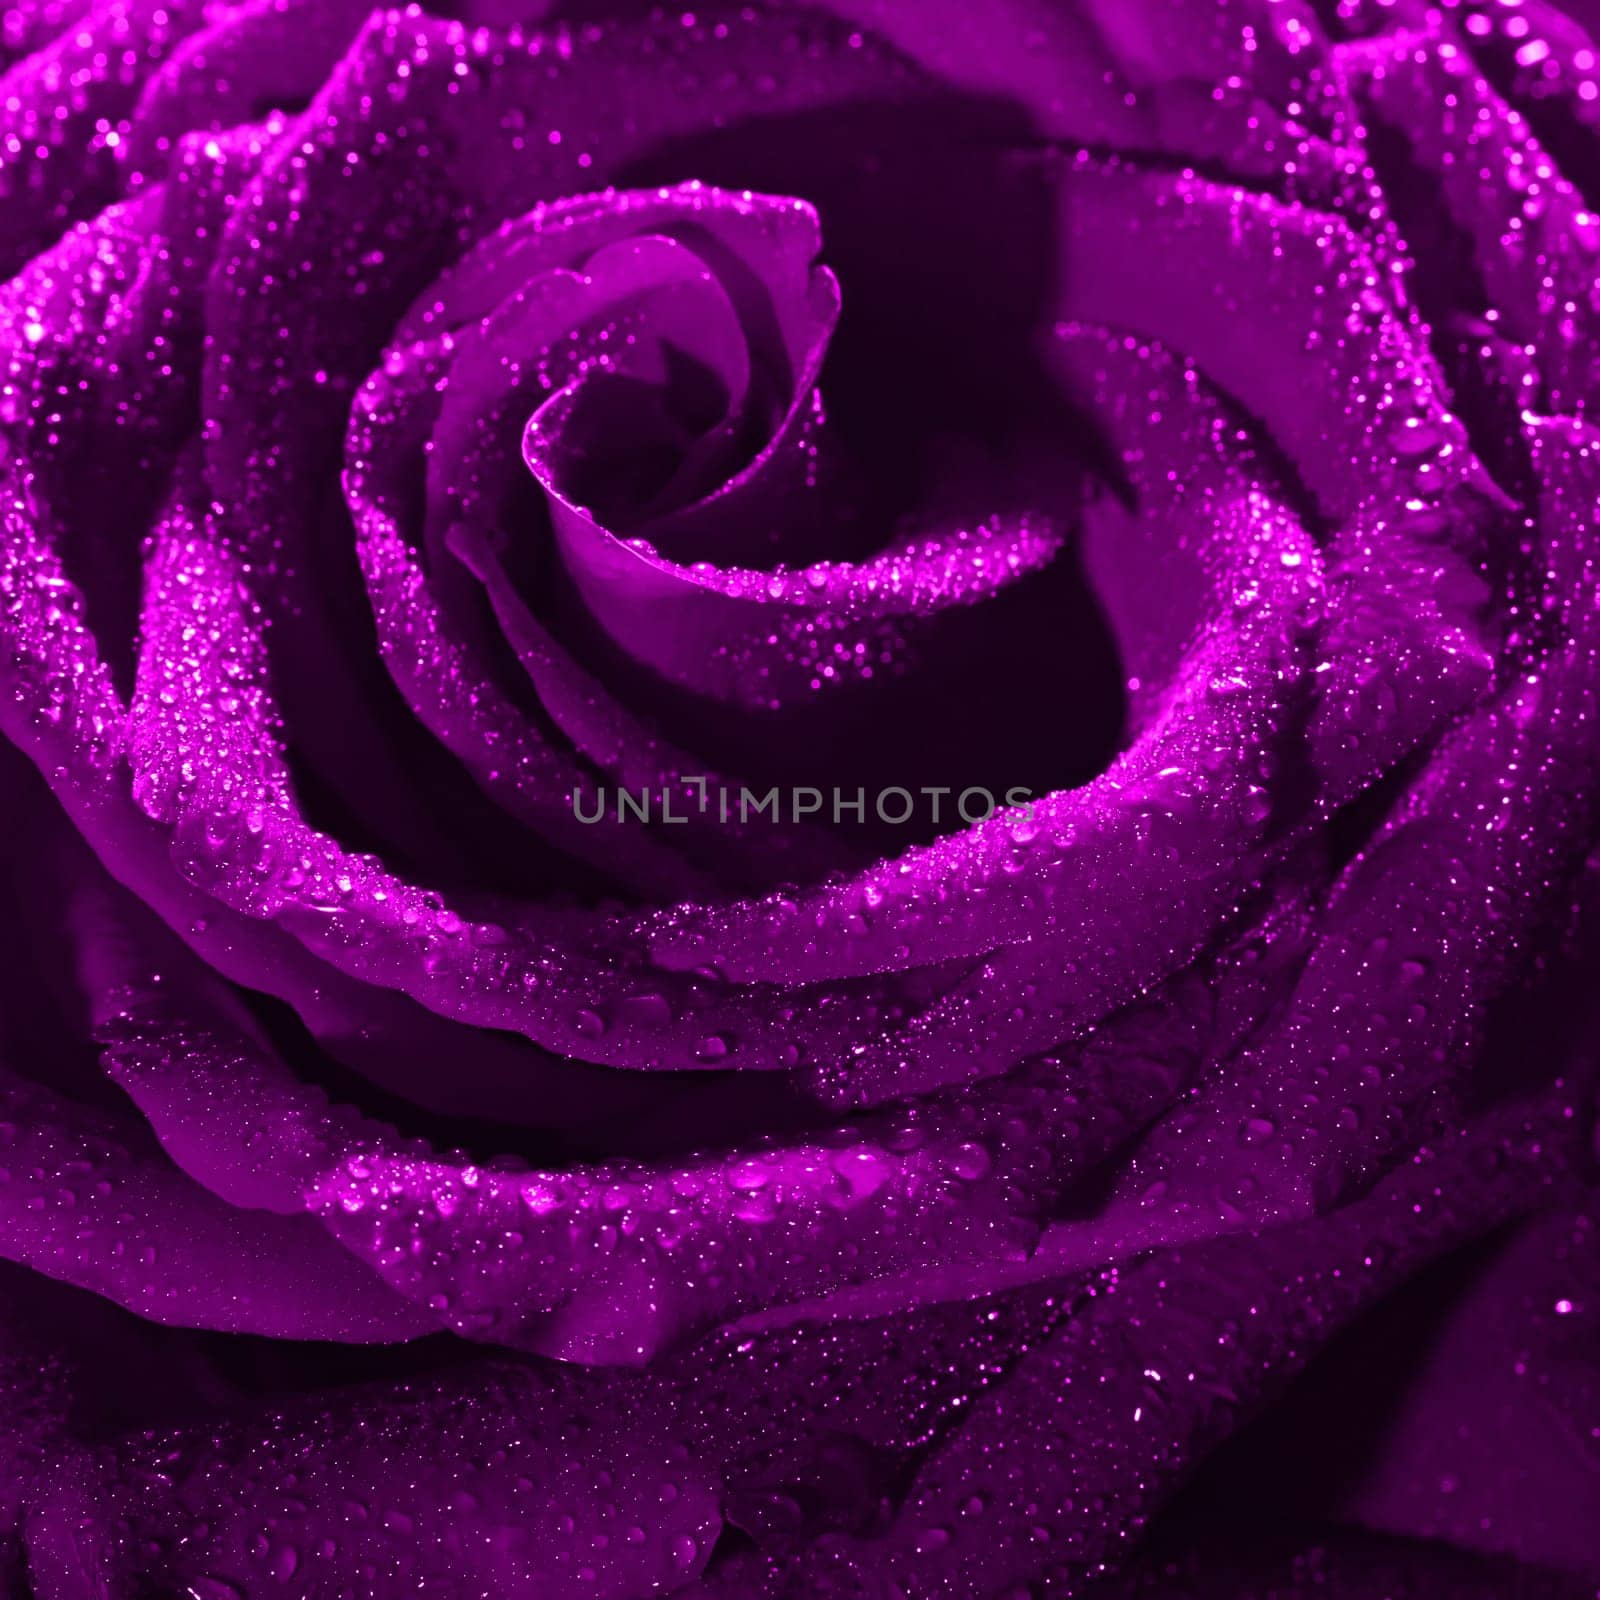 Blooming purple rose bud in water drops close-up on a black background, use as background, wallpaper, greeting card